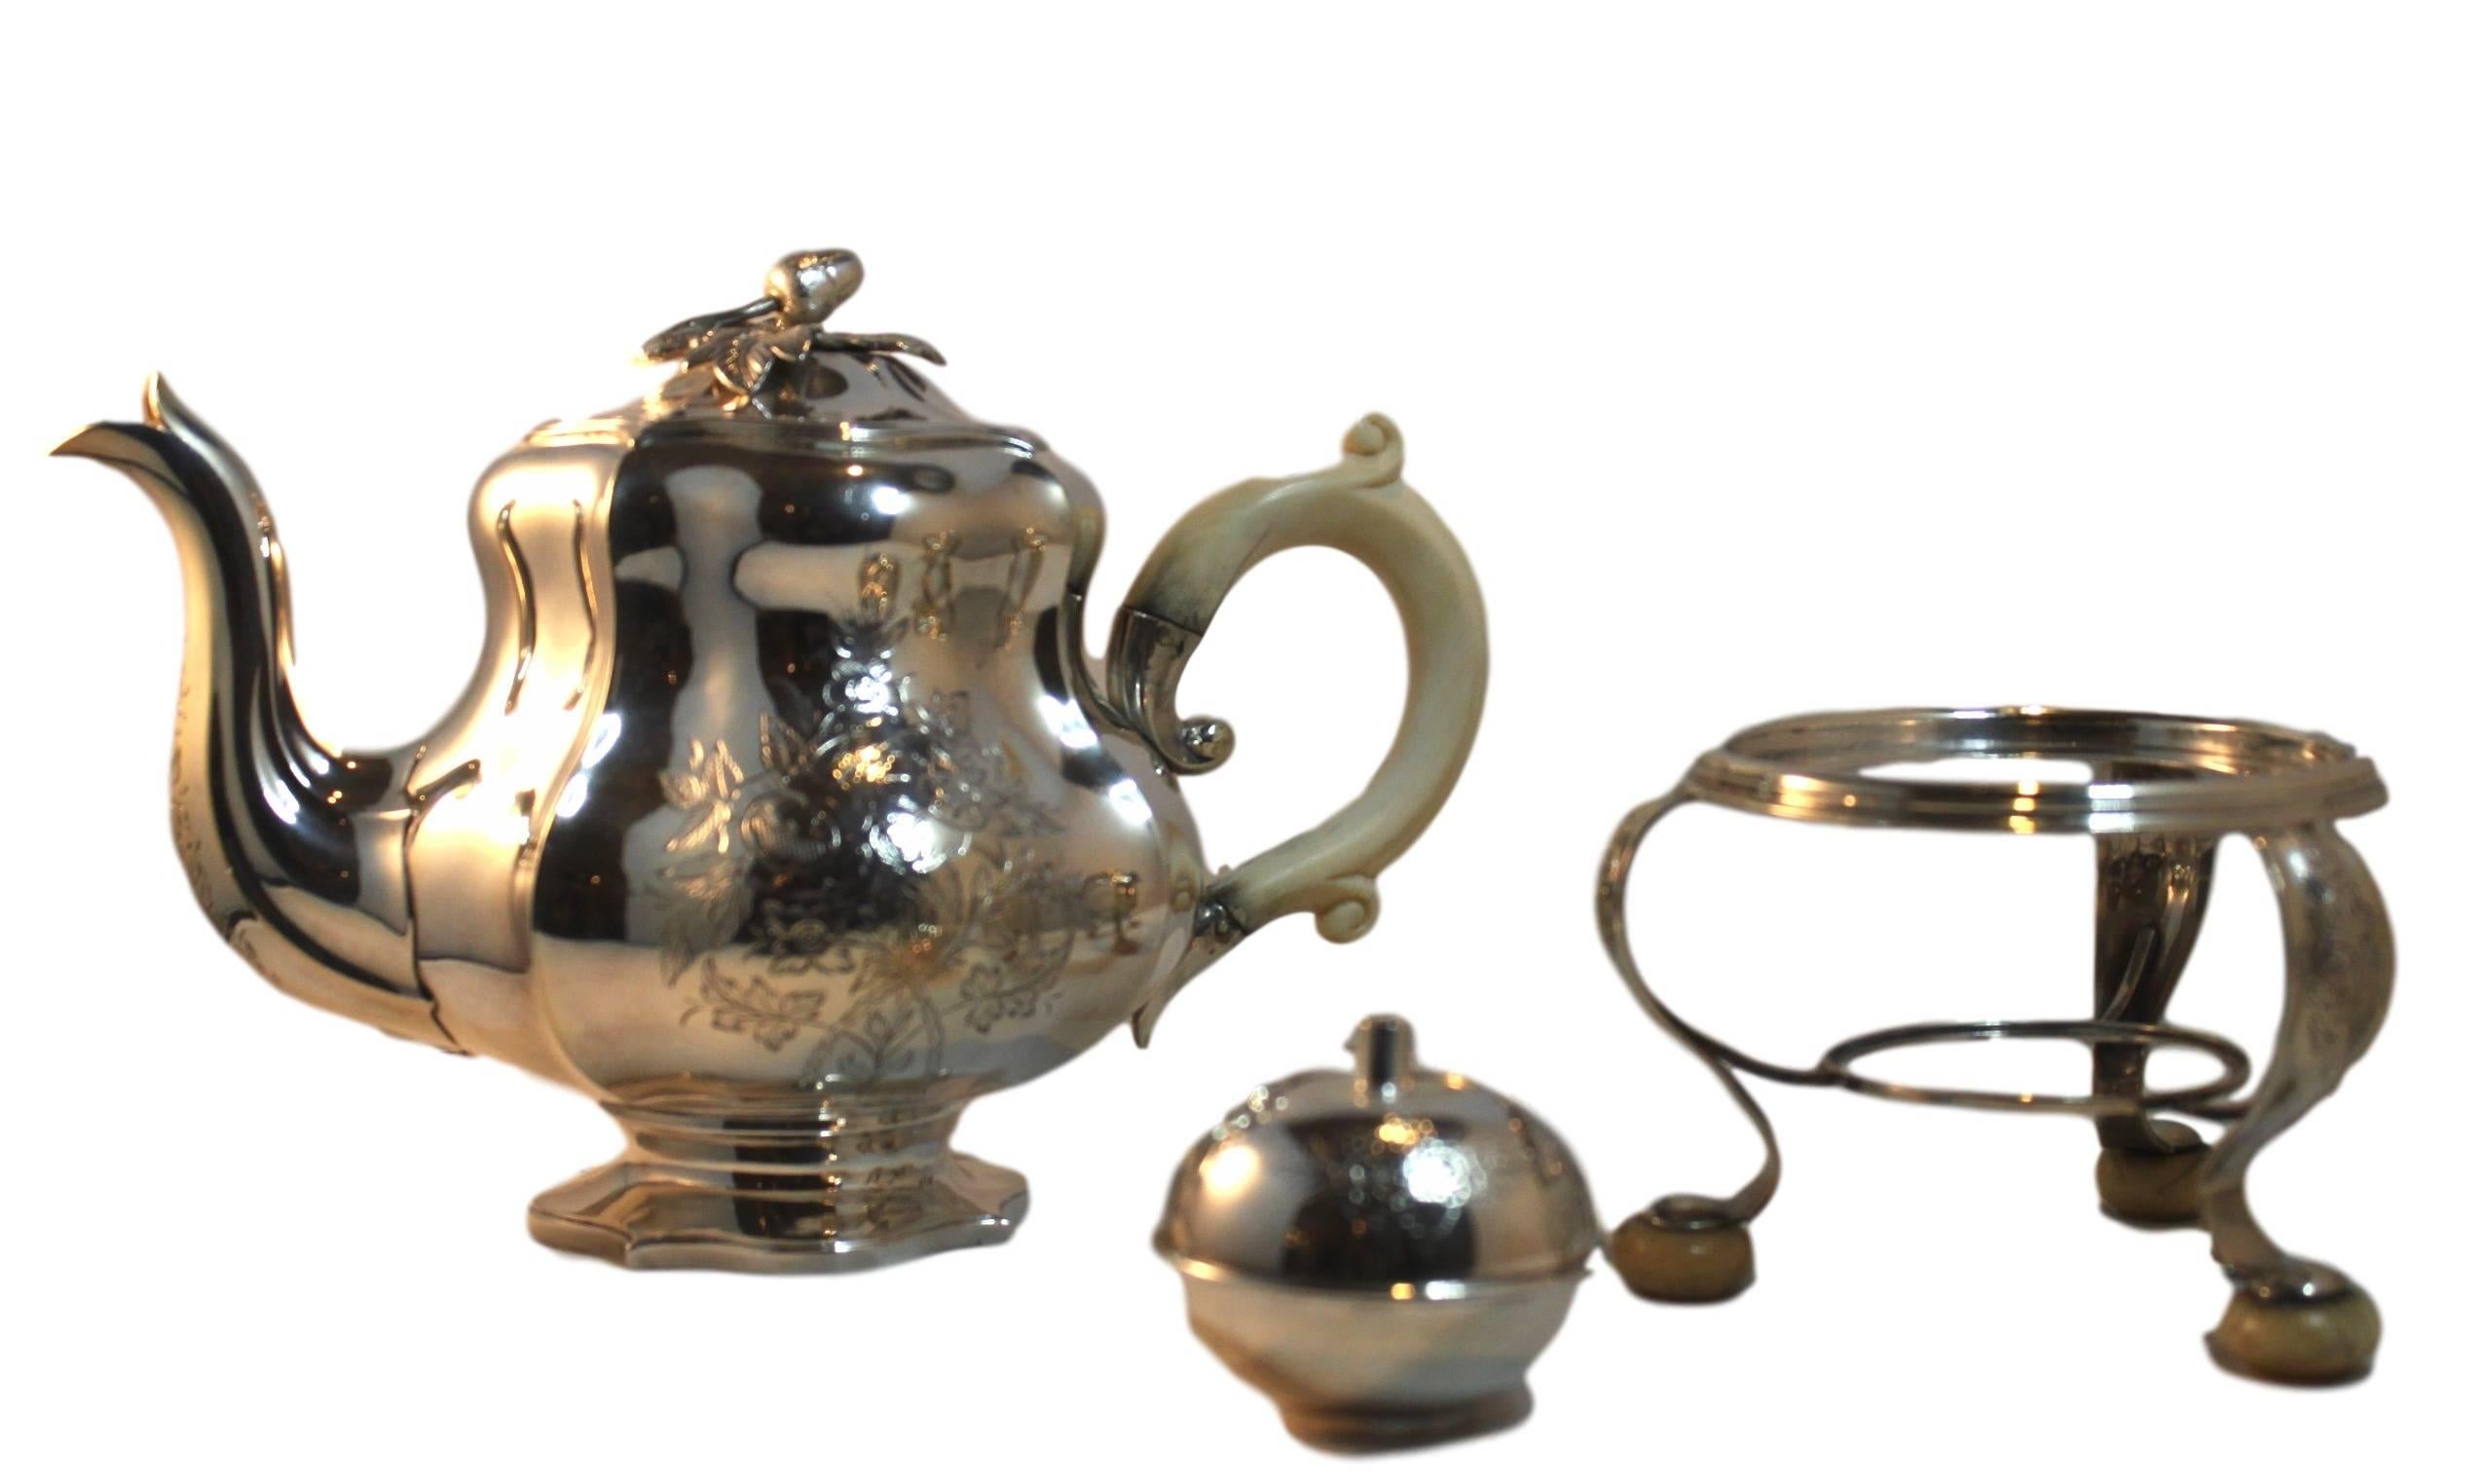 This rare and beautiful decorated Tea set is from the famous jewelry Bonebakker en Zoon in Amsterdam. The set consists of, The tea kettle, sugar bowl and milk can. The tea kettle rests on a standard and beneath that is the burner to keep the tea